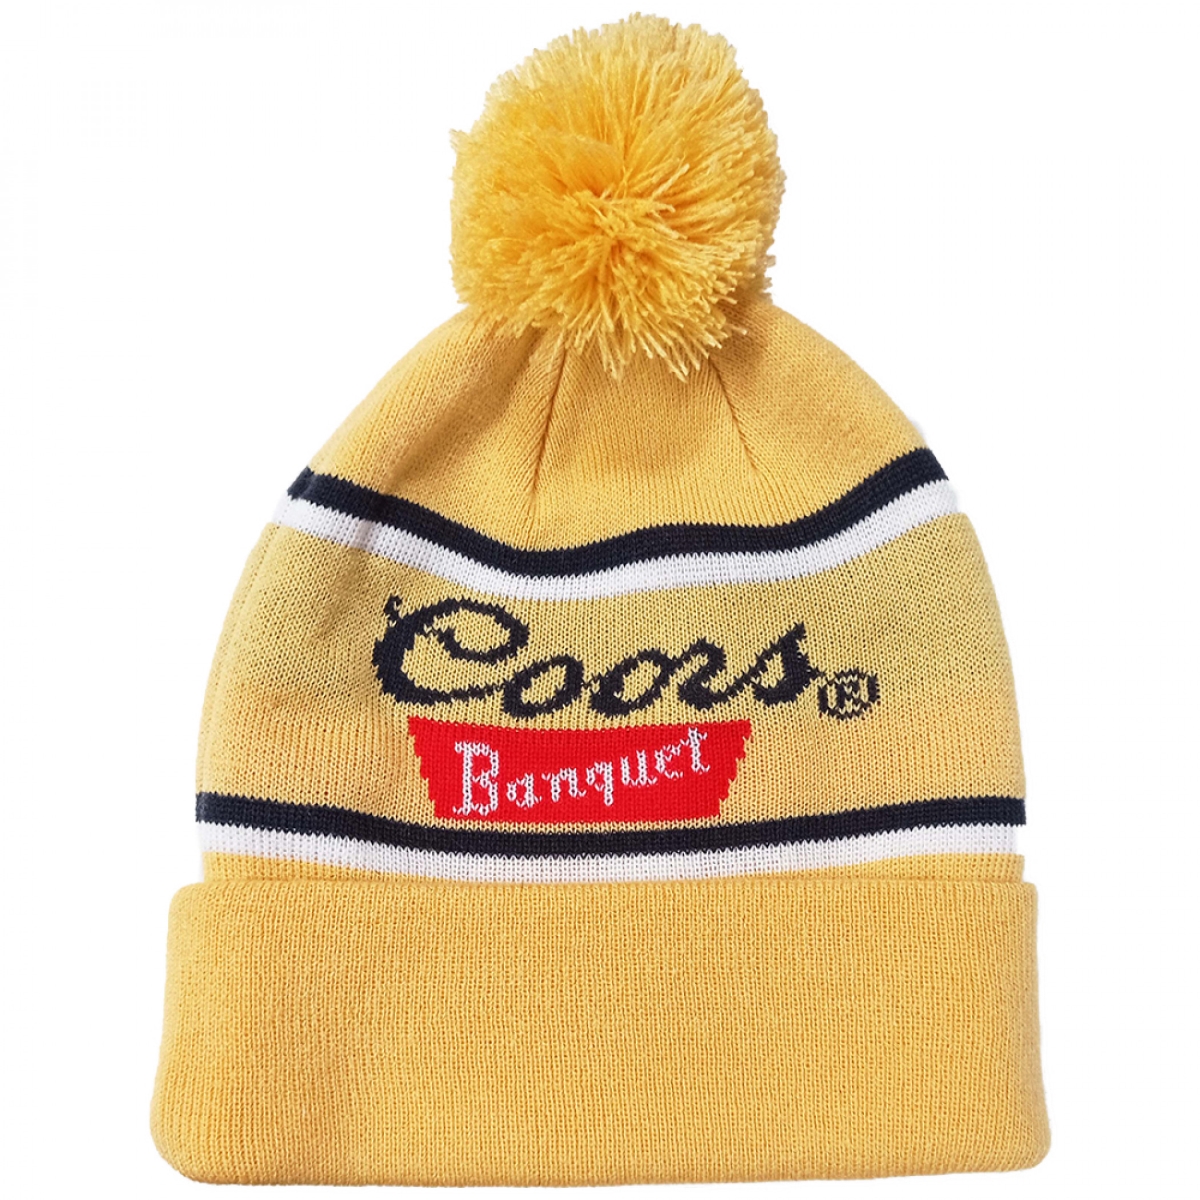 Picture of Coors 829211 Coors Banquet Beer Knit Cuff Pom Beanie